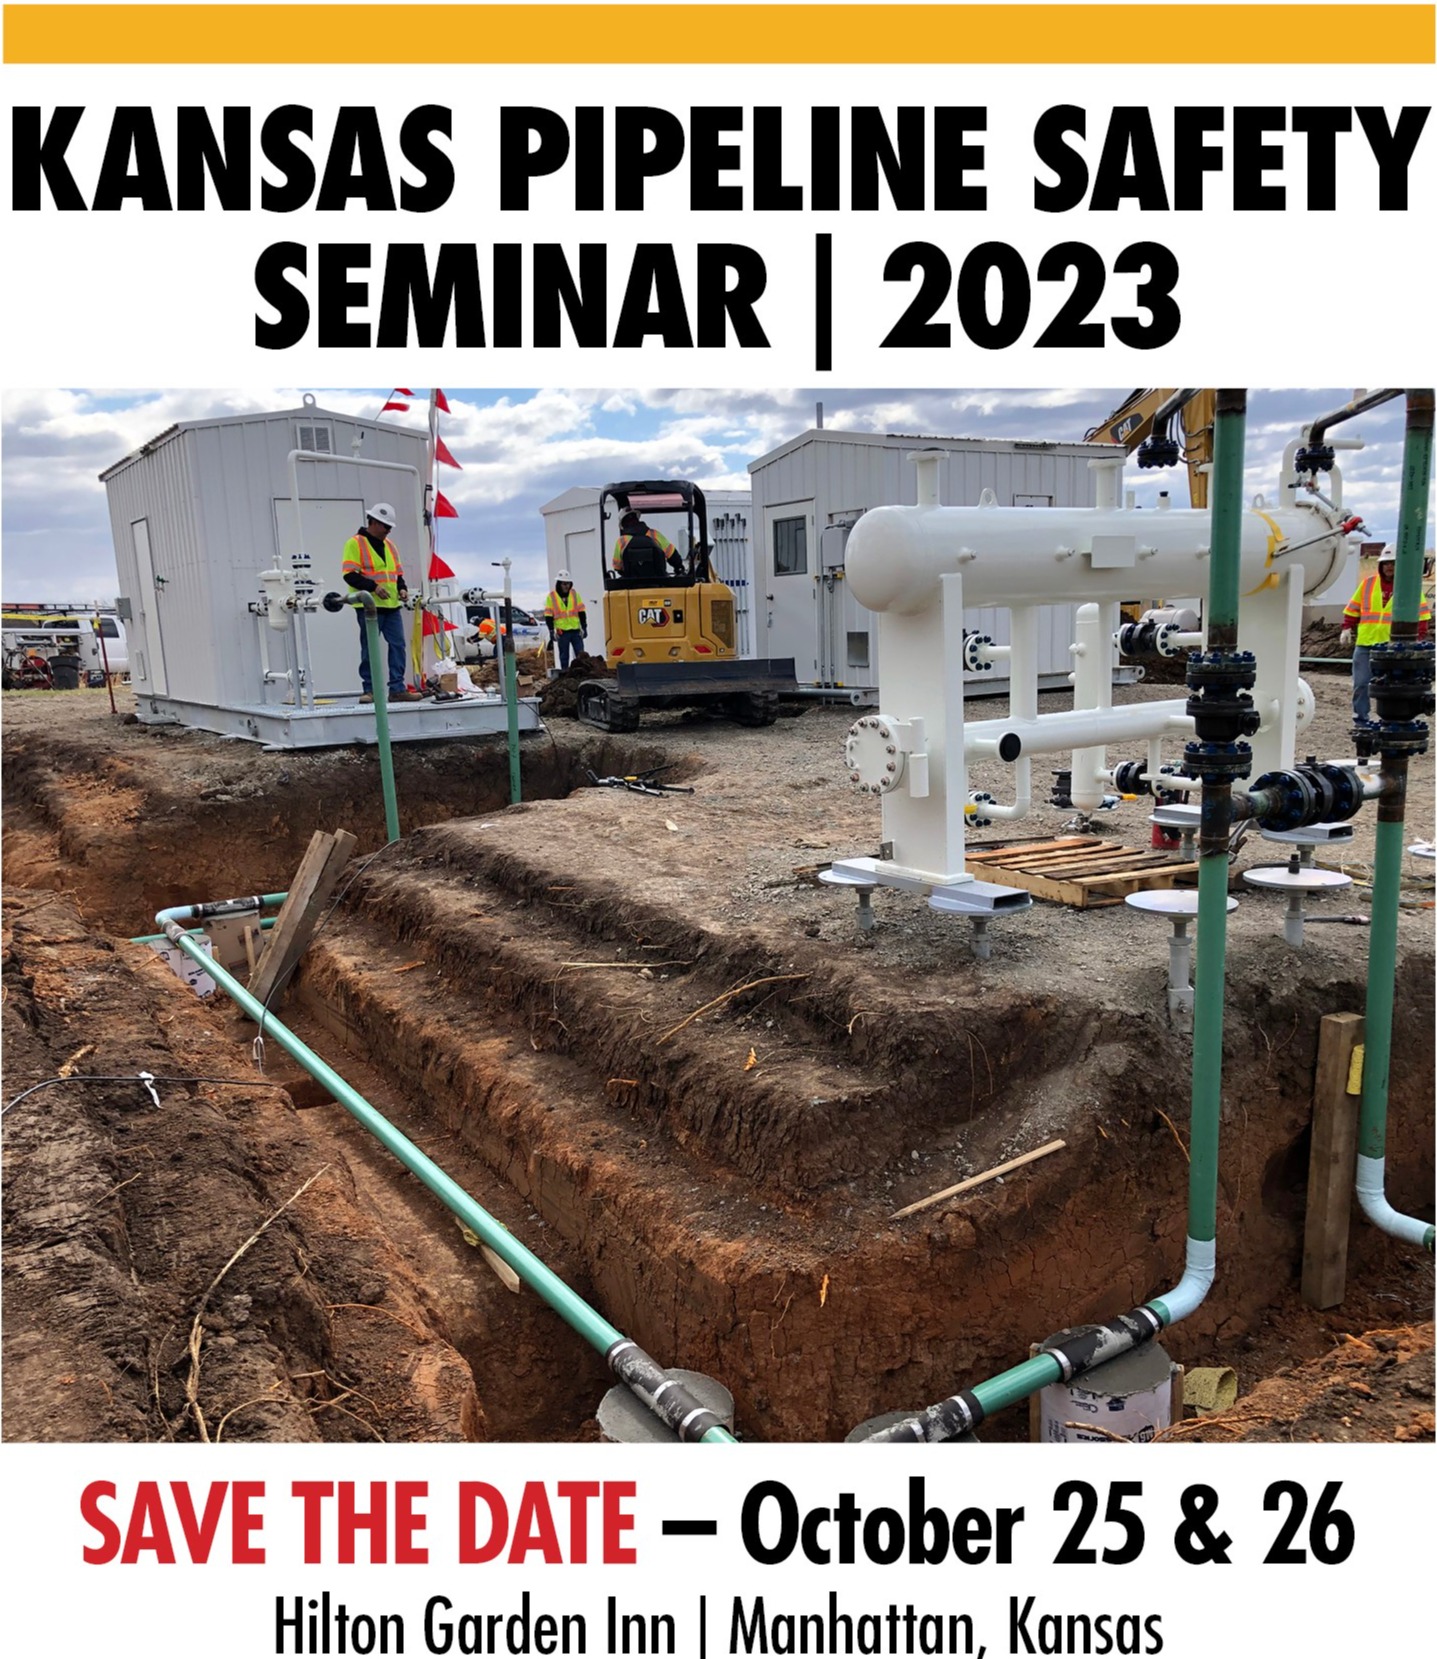 Pipeline Safety Seminar 2023 save the date October 25 and 26